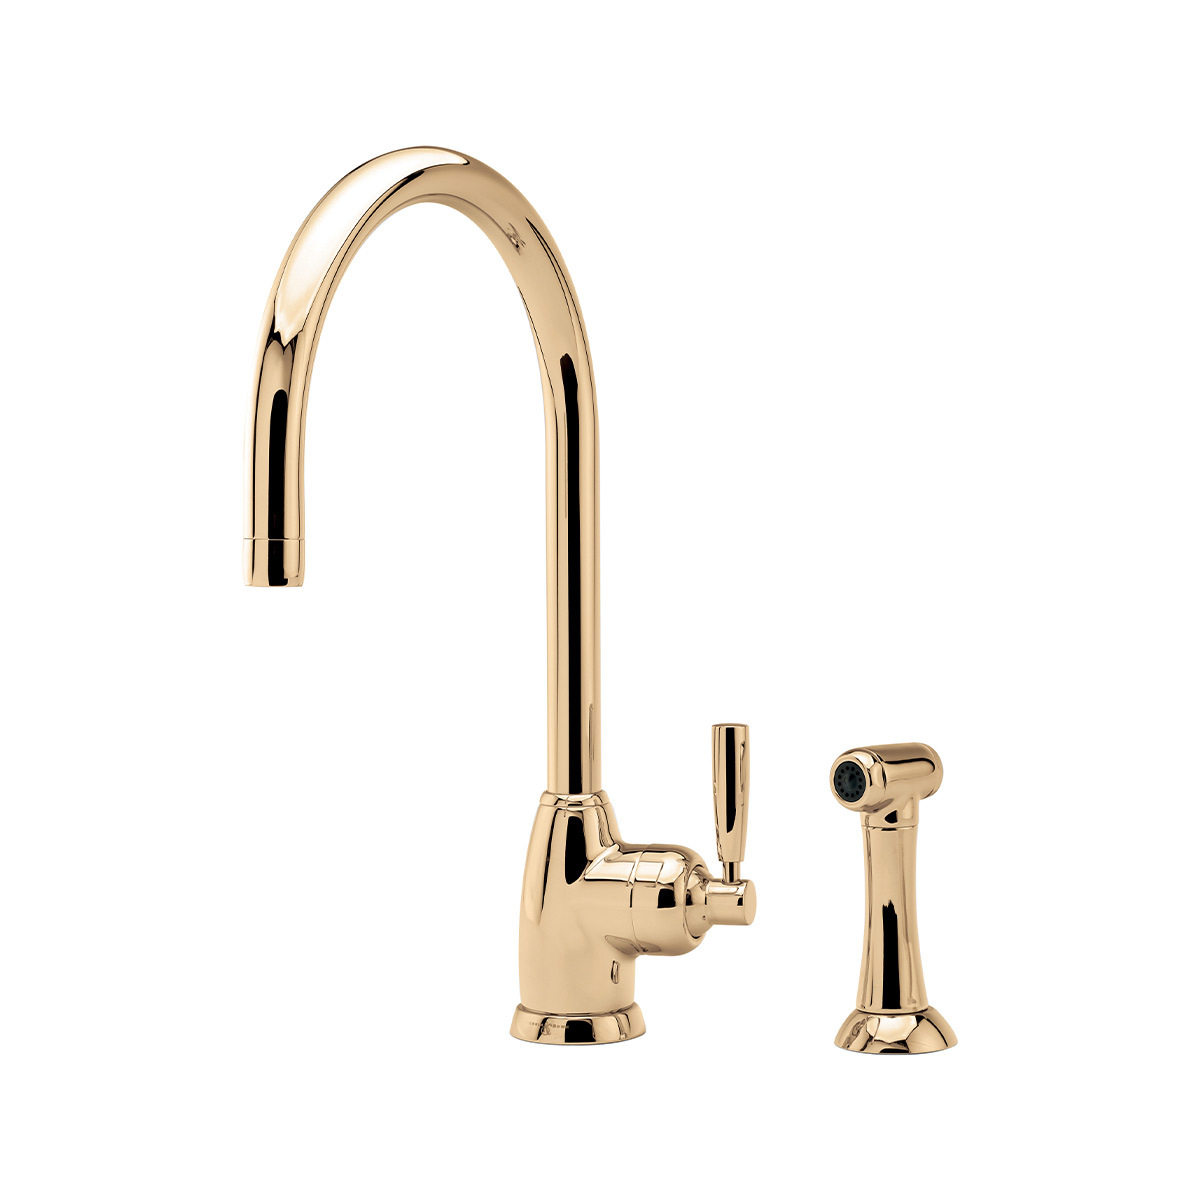 Shaws by Perrin & Rowe Roeburn kitchen mixer with spray rinse in Polished Brass. Mimas style monobloc kitchen tap AUSH.4846. Distributed in Australia by Luxe by Design, Brisbane.